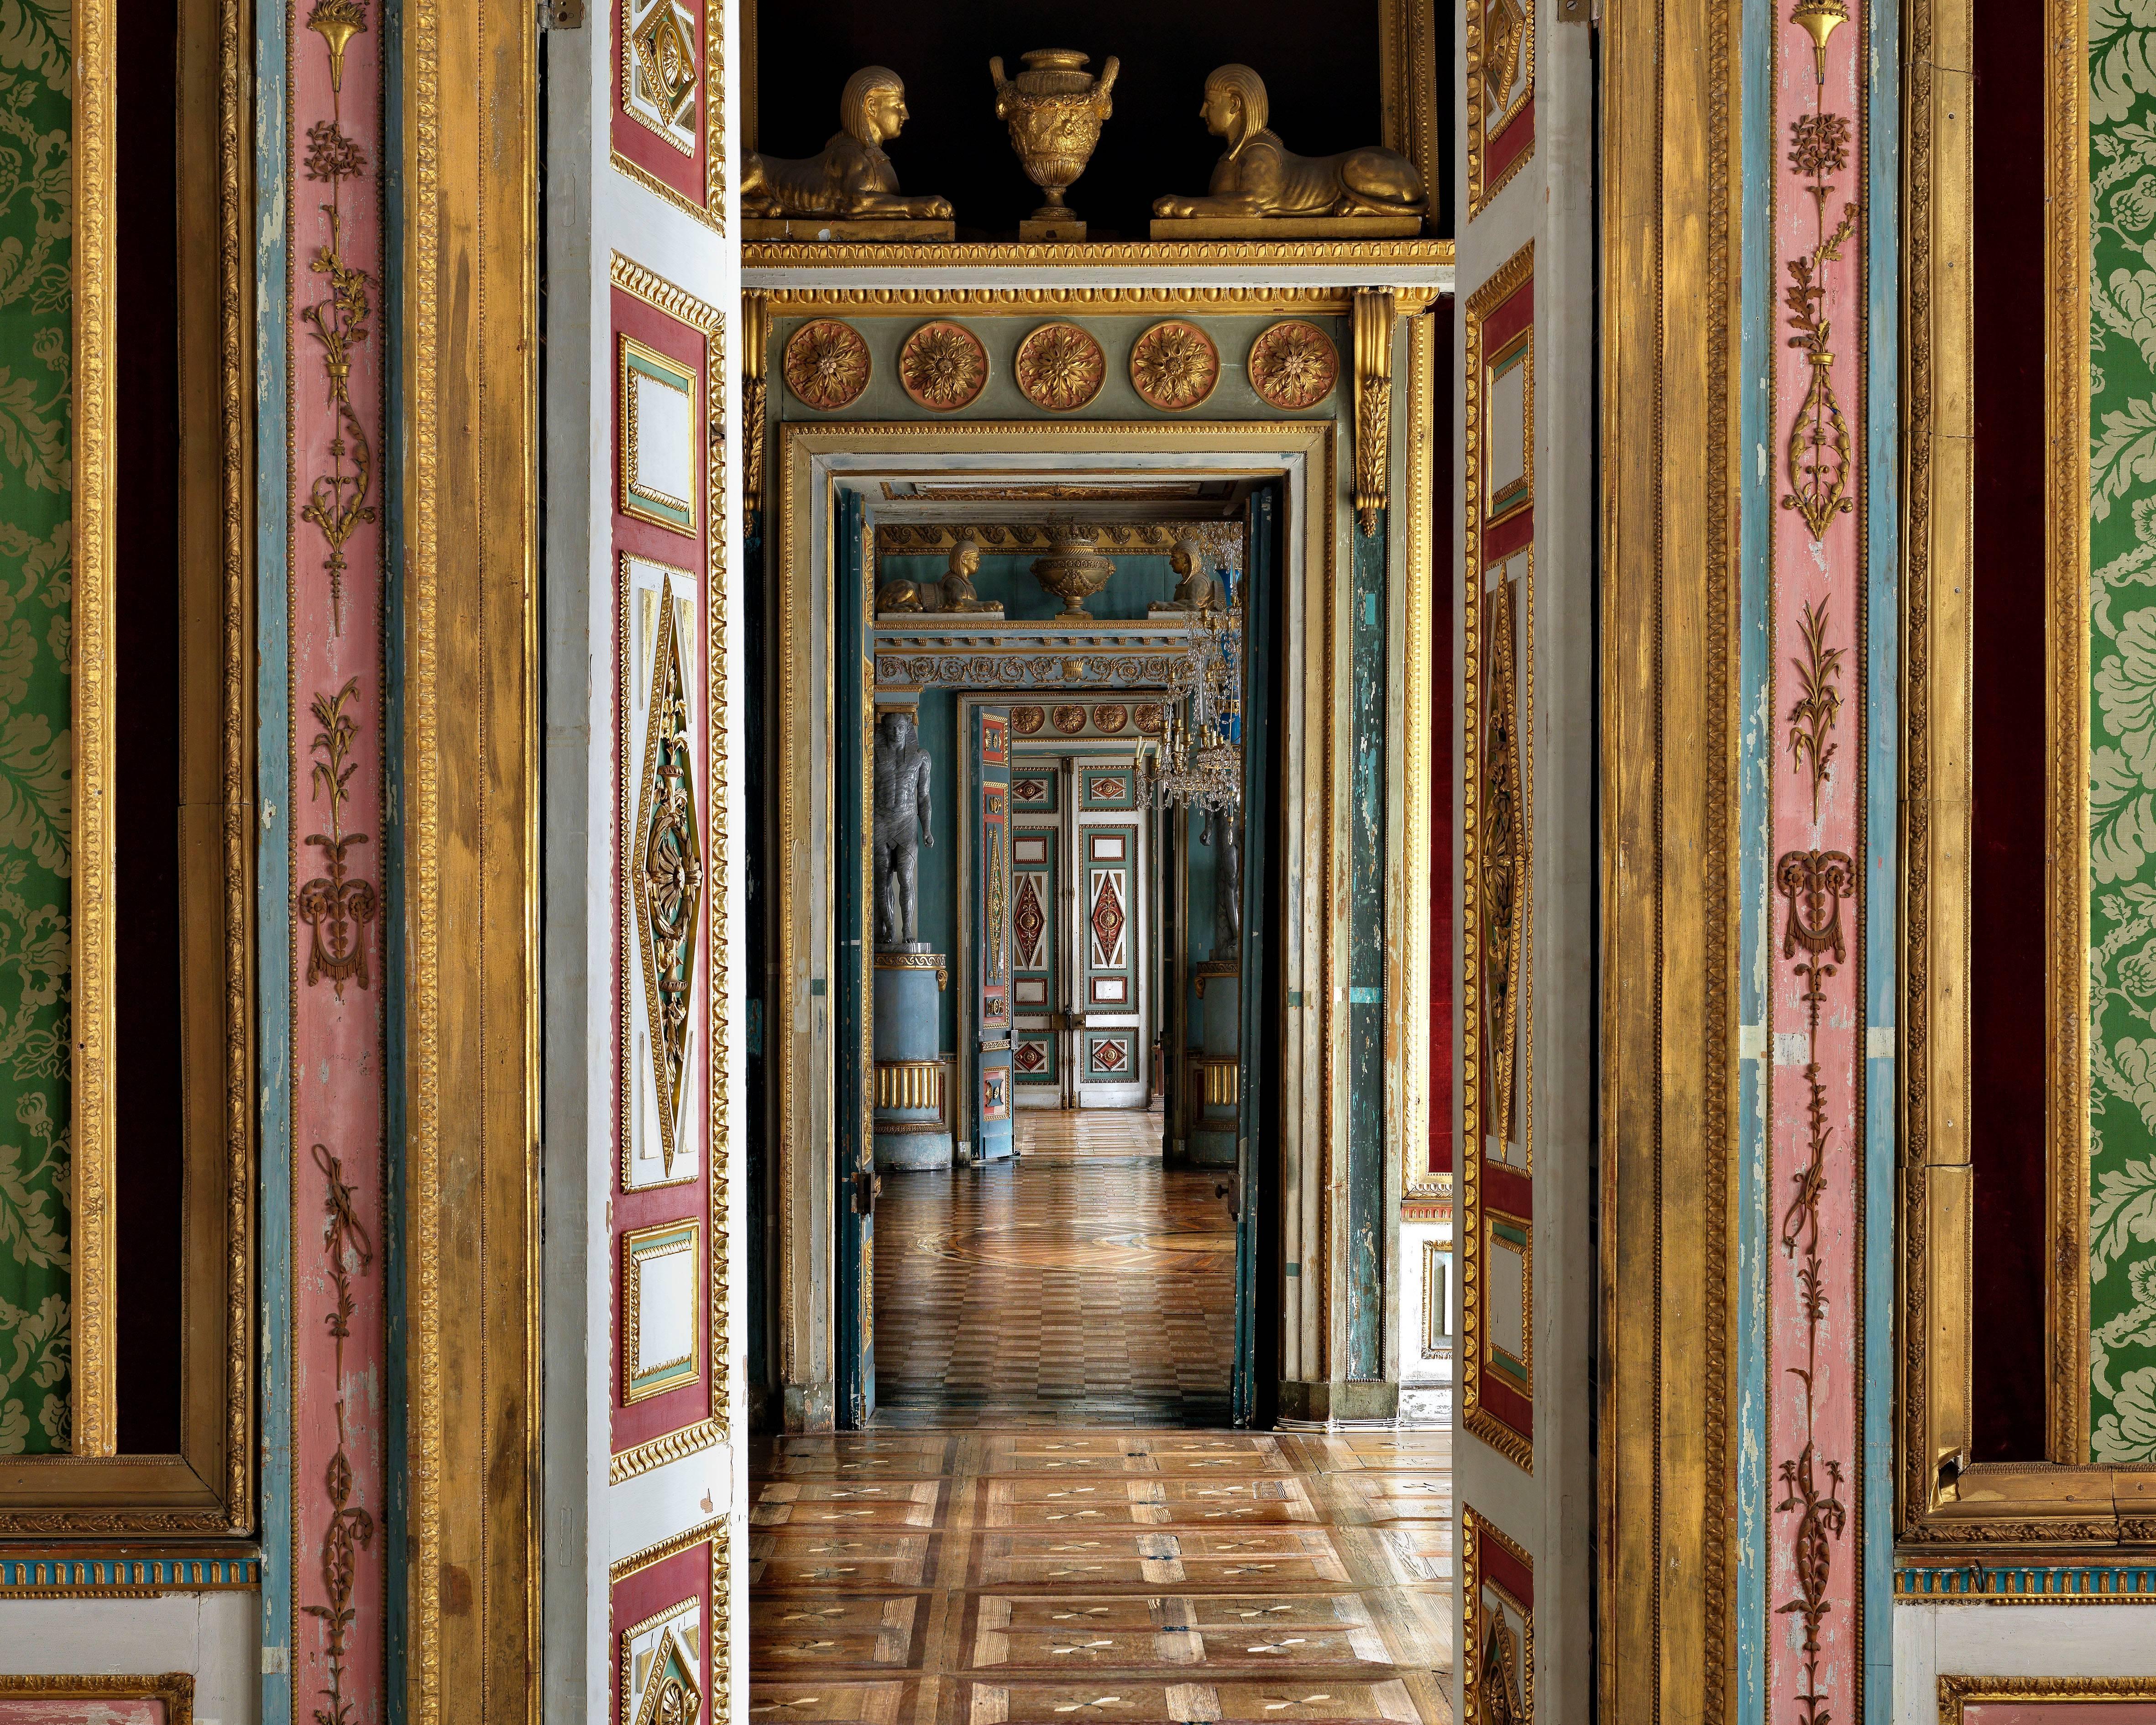 Palazzo di Ostankino, Mosca, 2015
Chromogenic print
Edition of 5
Signed, dated, and numbered on verso label   

39.5 x 47.5 inches edition of 5  
47.5 x 59 inches edition of 5  
71 x 88.5 inches edition of 5   

framing options also available 